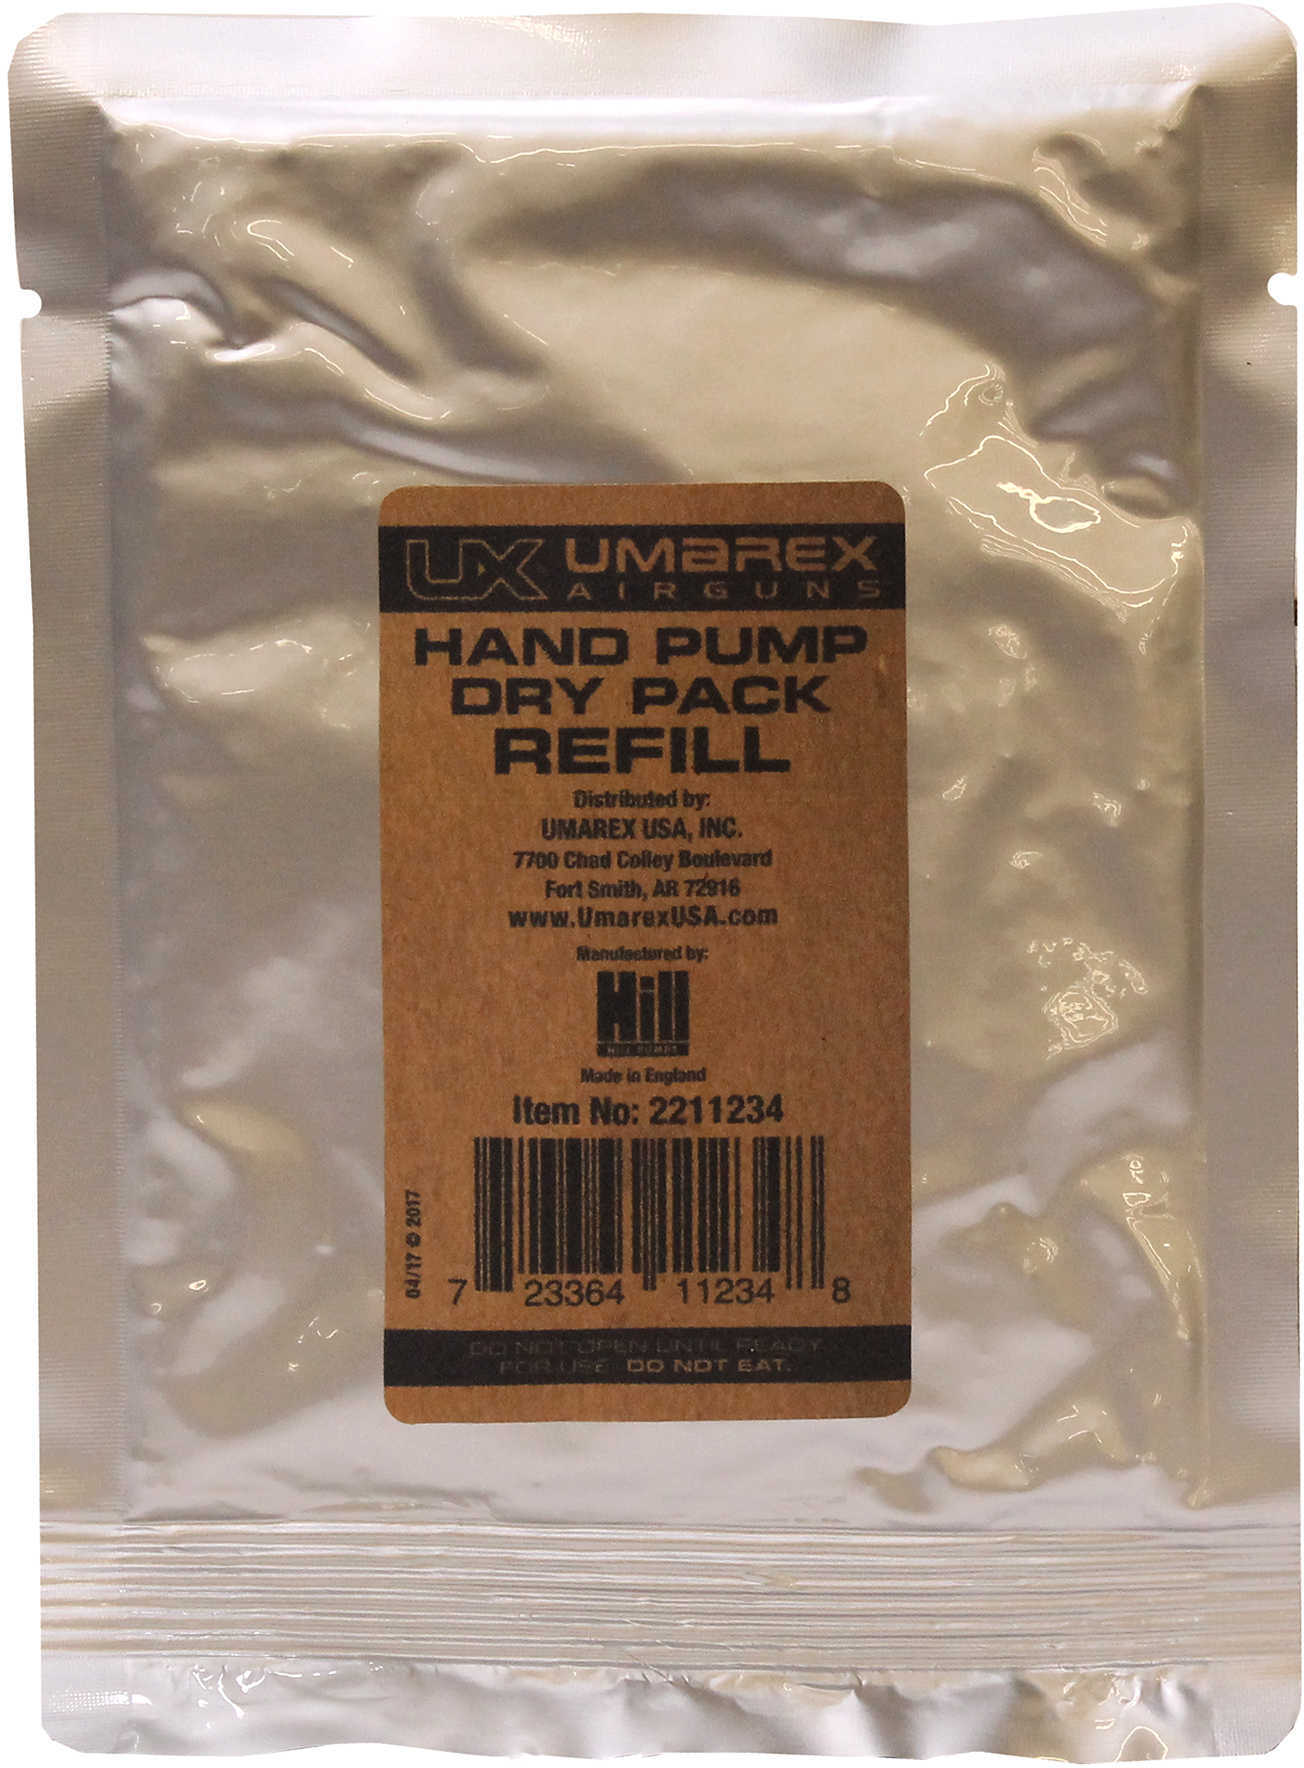 PCP Dry Pack Refill Md: 2211234 Umarex USA